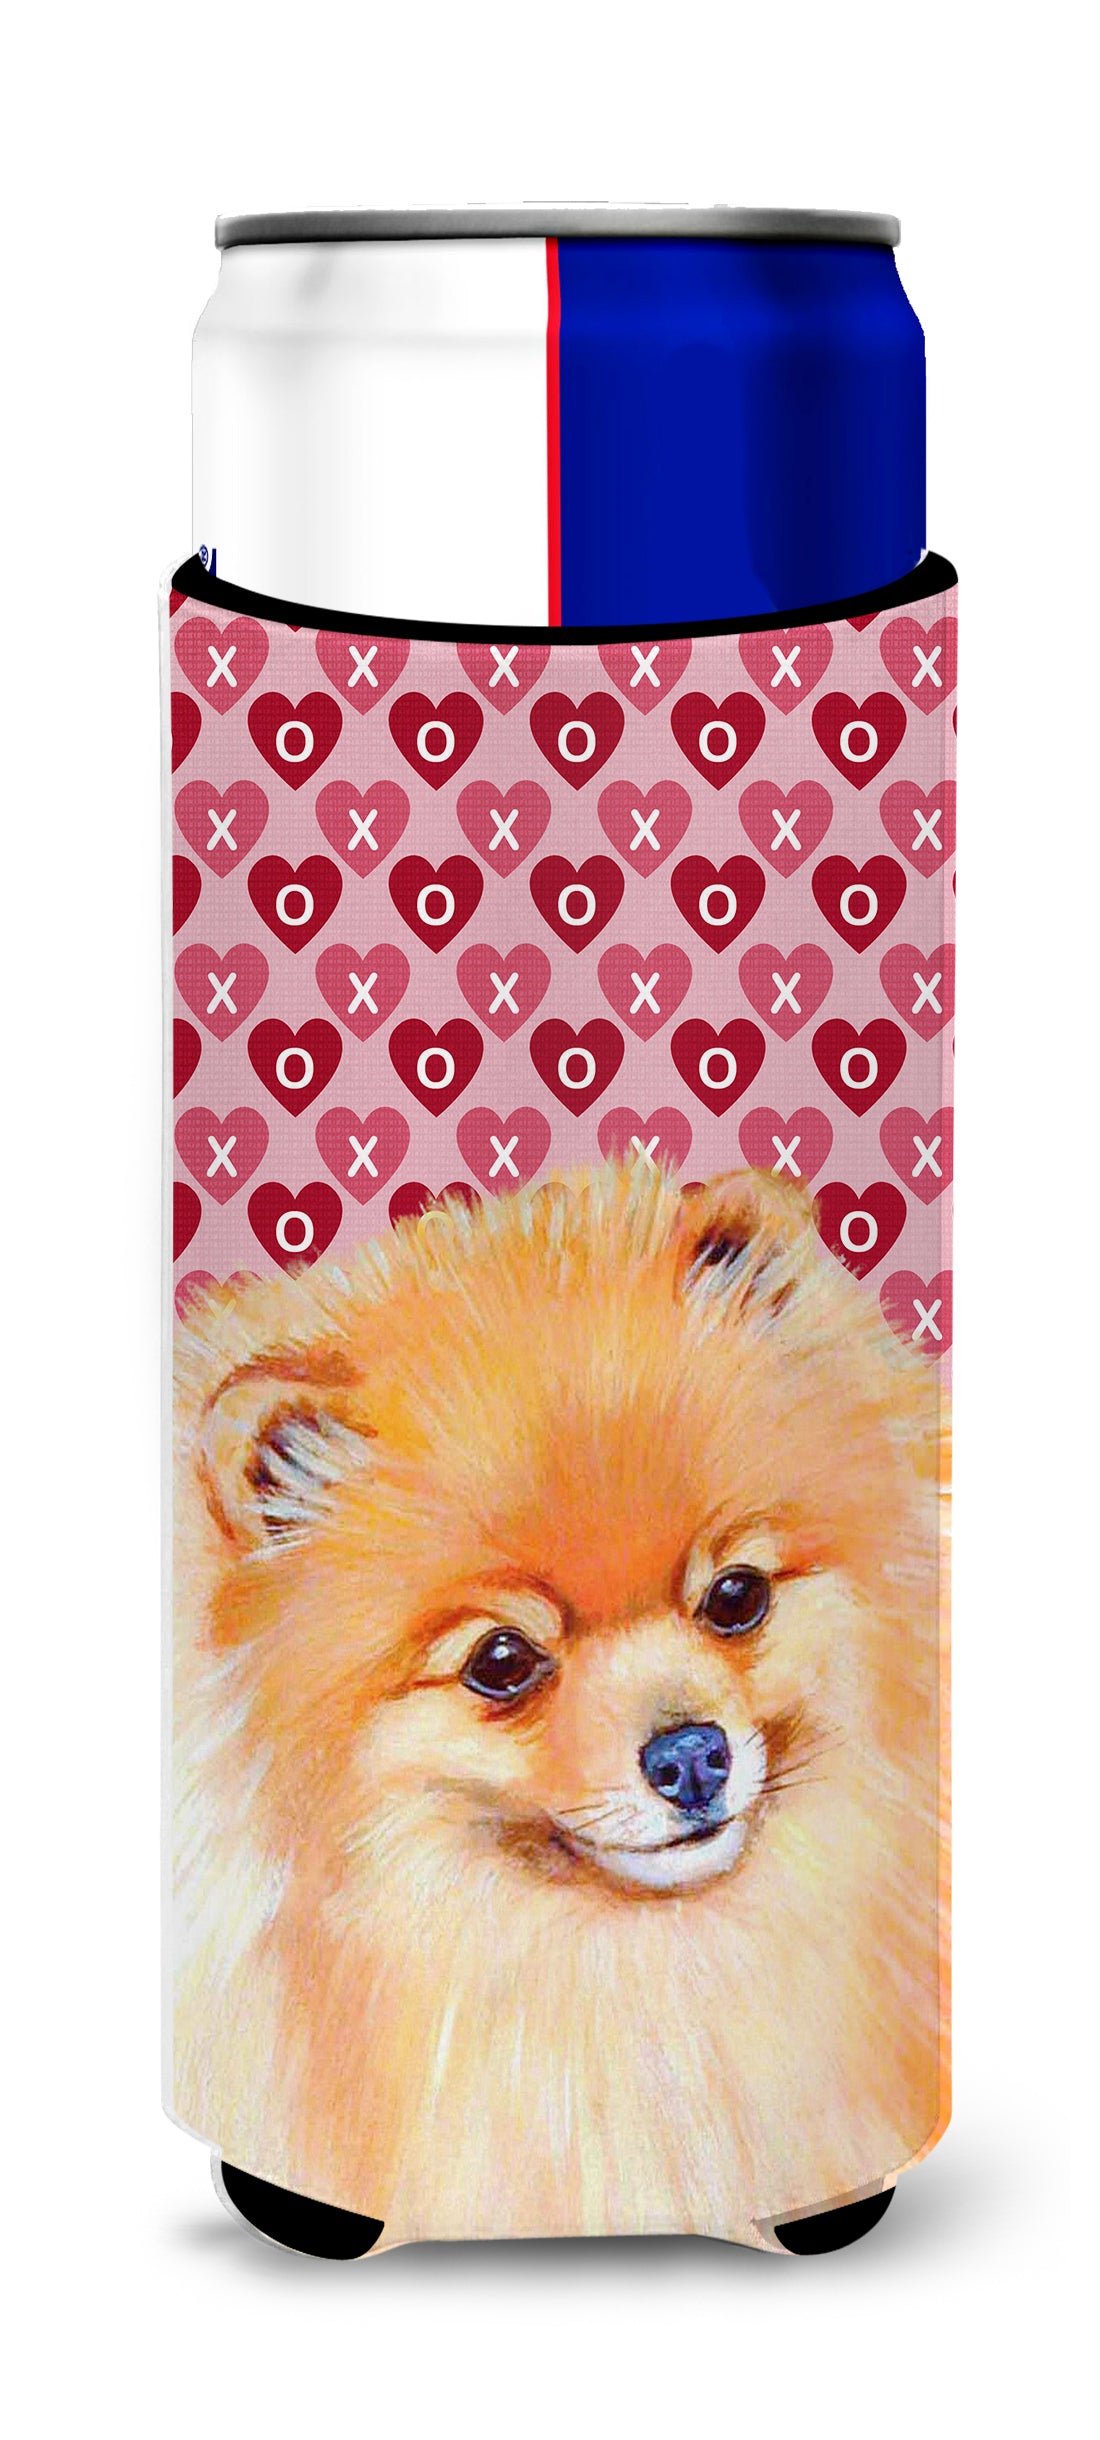 Pomeranian Hearts Love and Valentine's Day Portrait Ultra Beverage Insulators for slim cans LH9170MUK